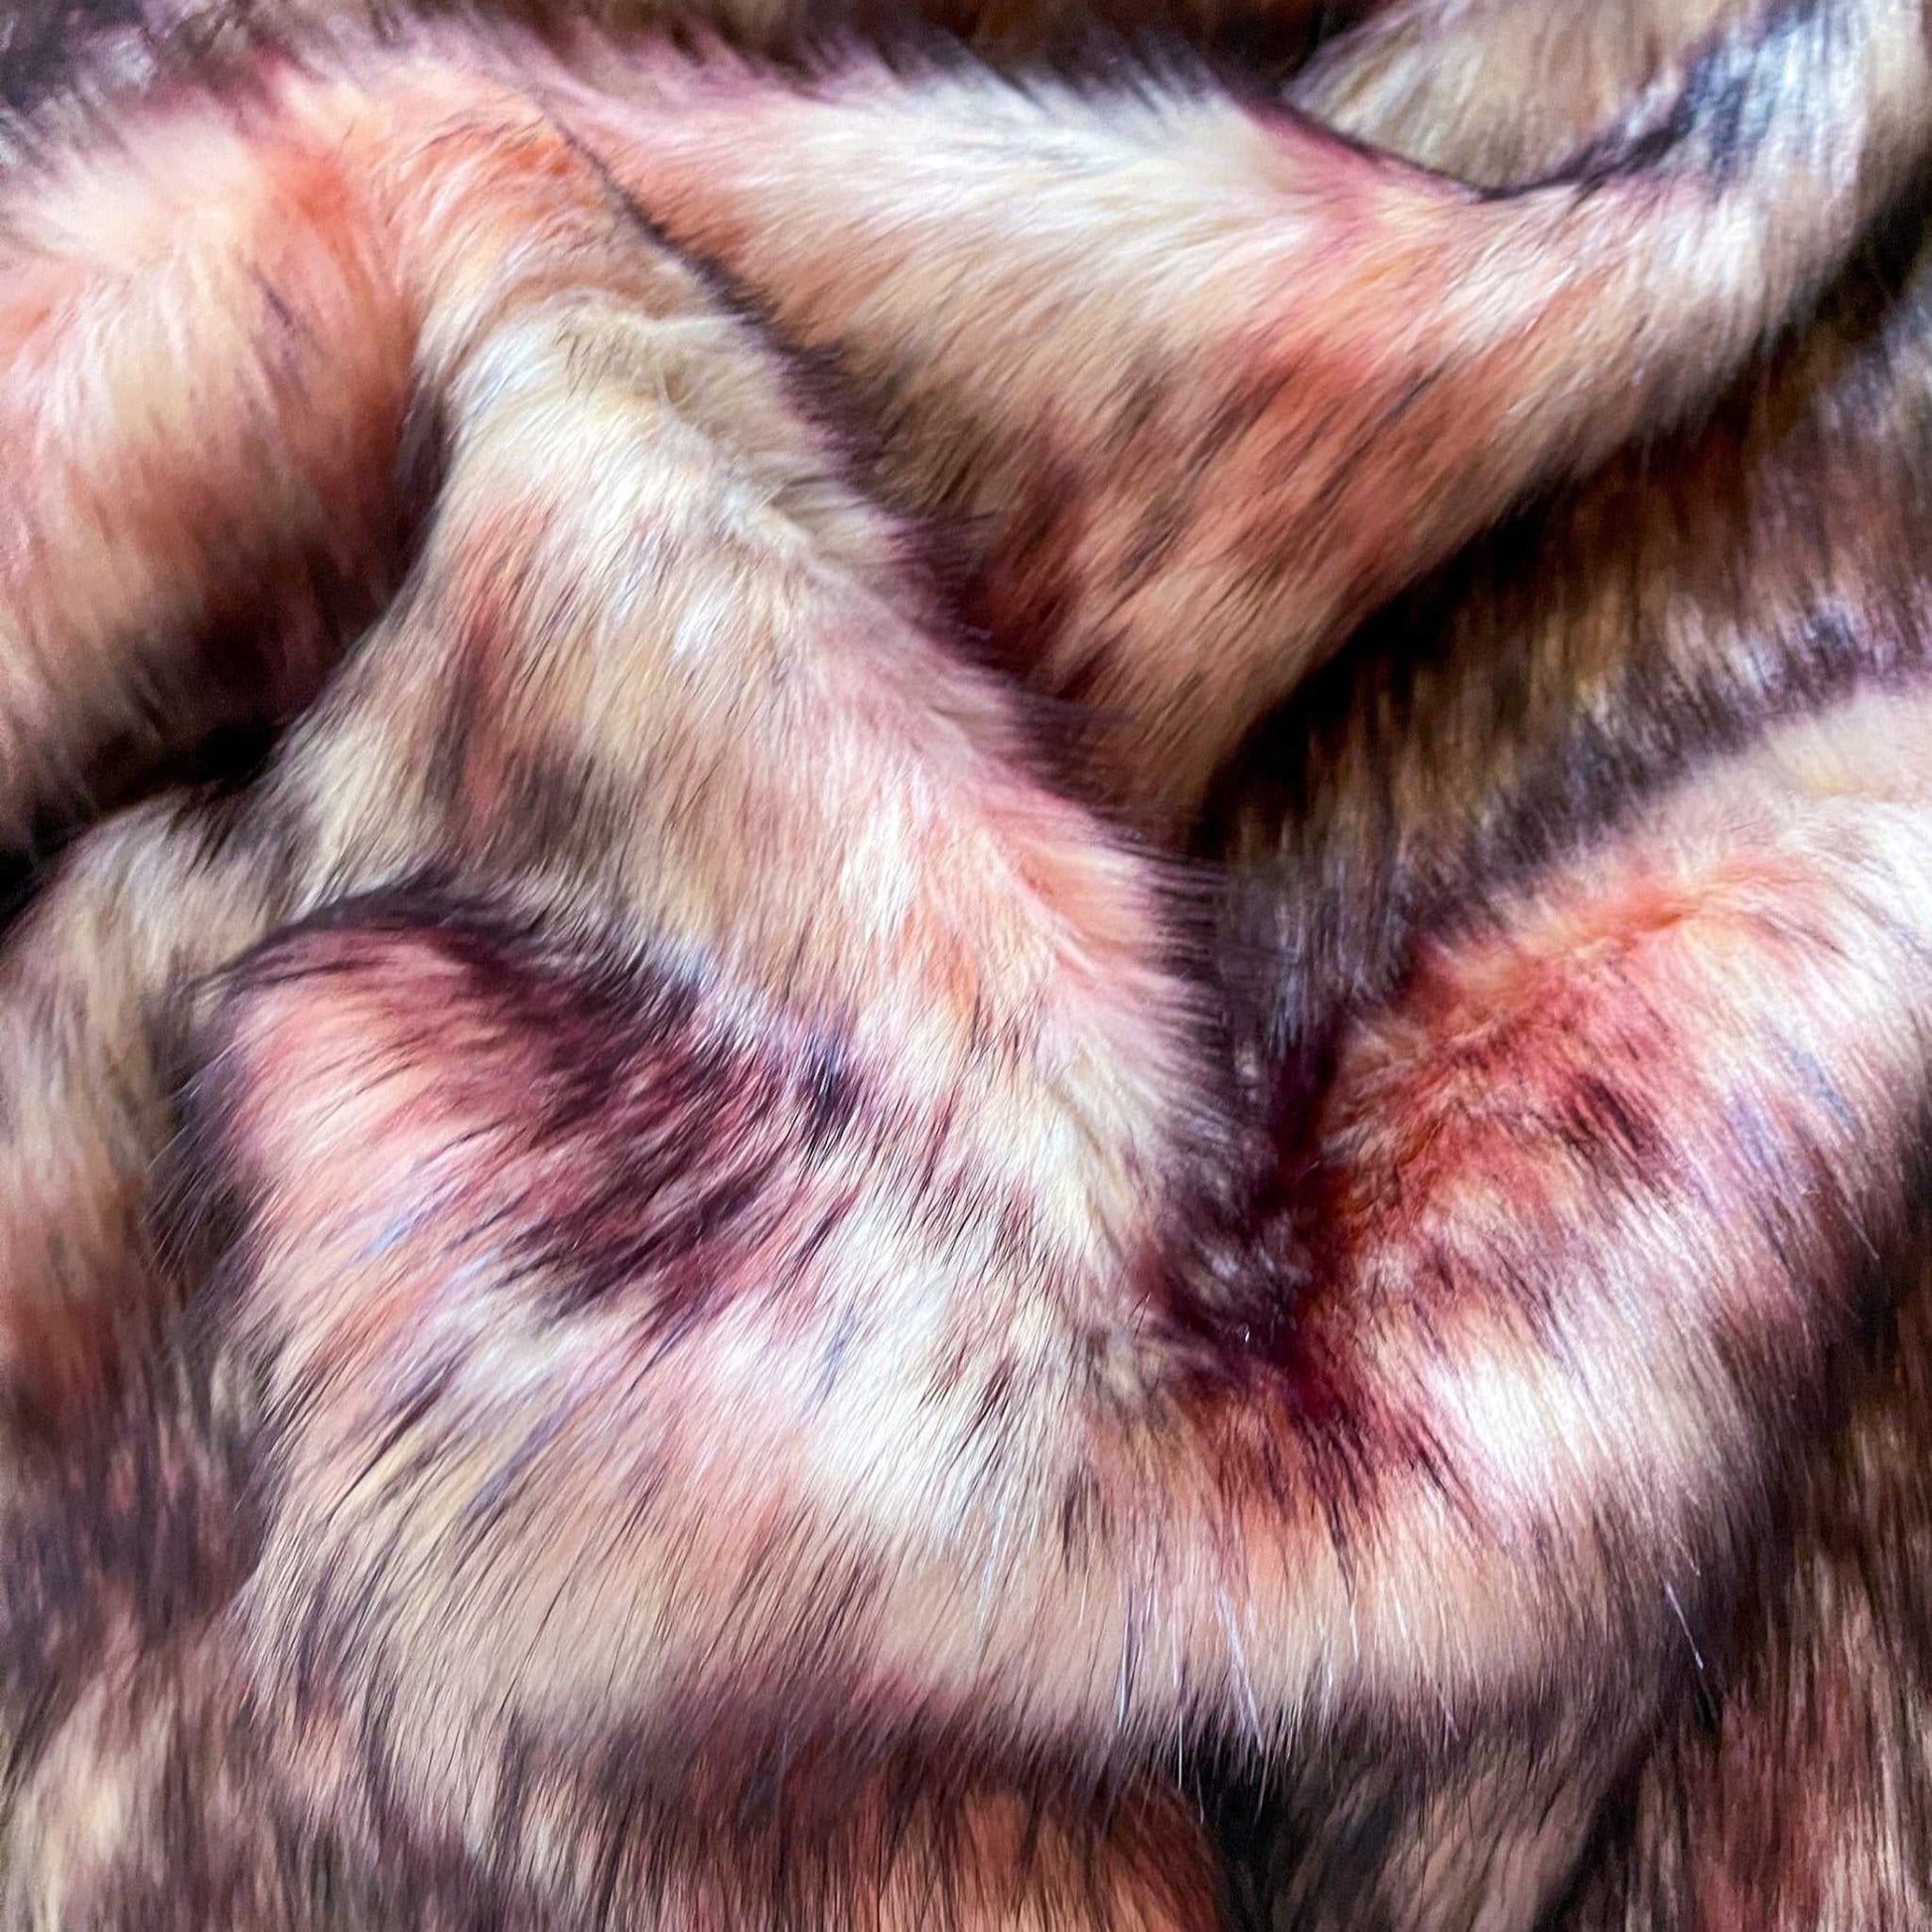 Flamingo Faux Fur Fabric by the Yard or Meter | Blush Pink, Grey and Black, Pompom, Arts & Crafts, Decor, Costumer Faux Fur Fabric 3 $ Buttons & Beans Co.